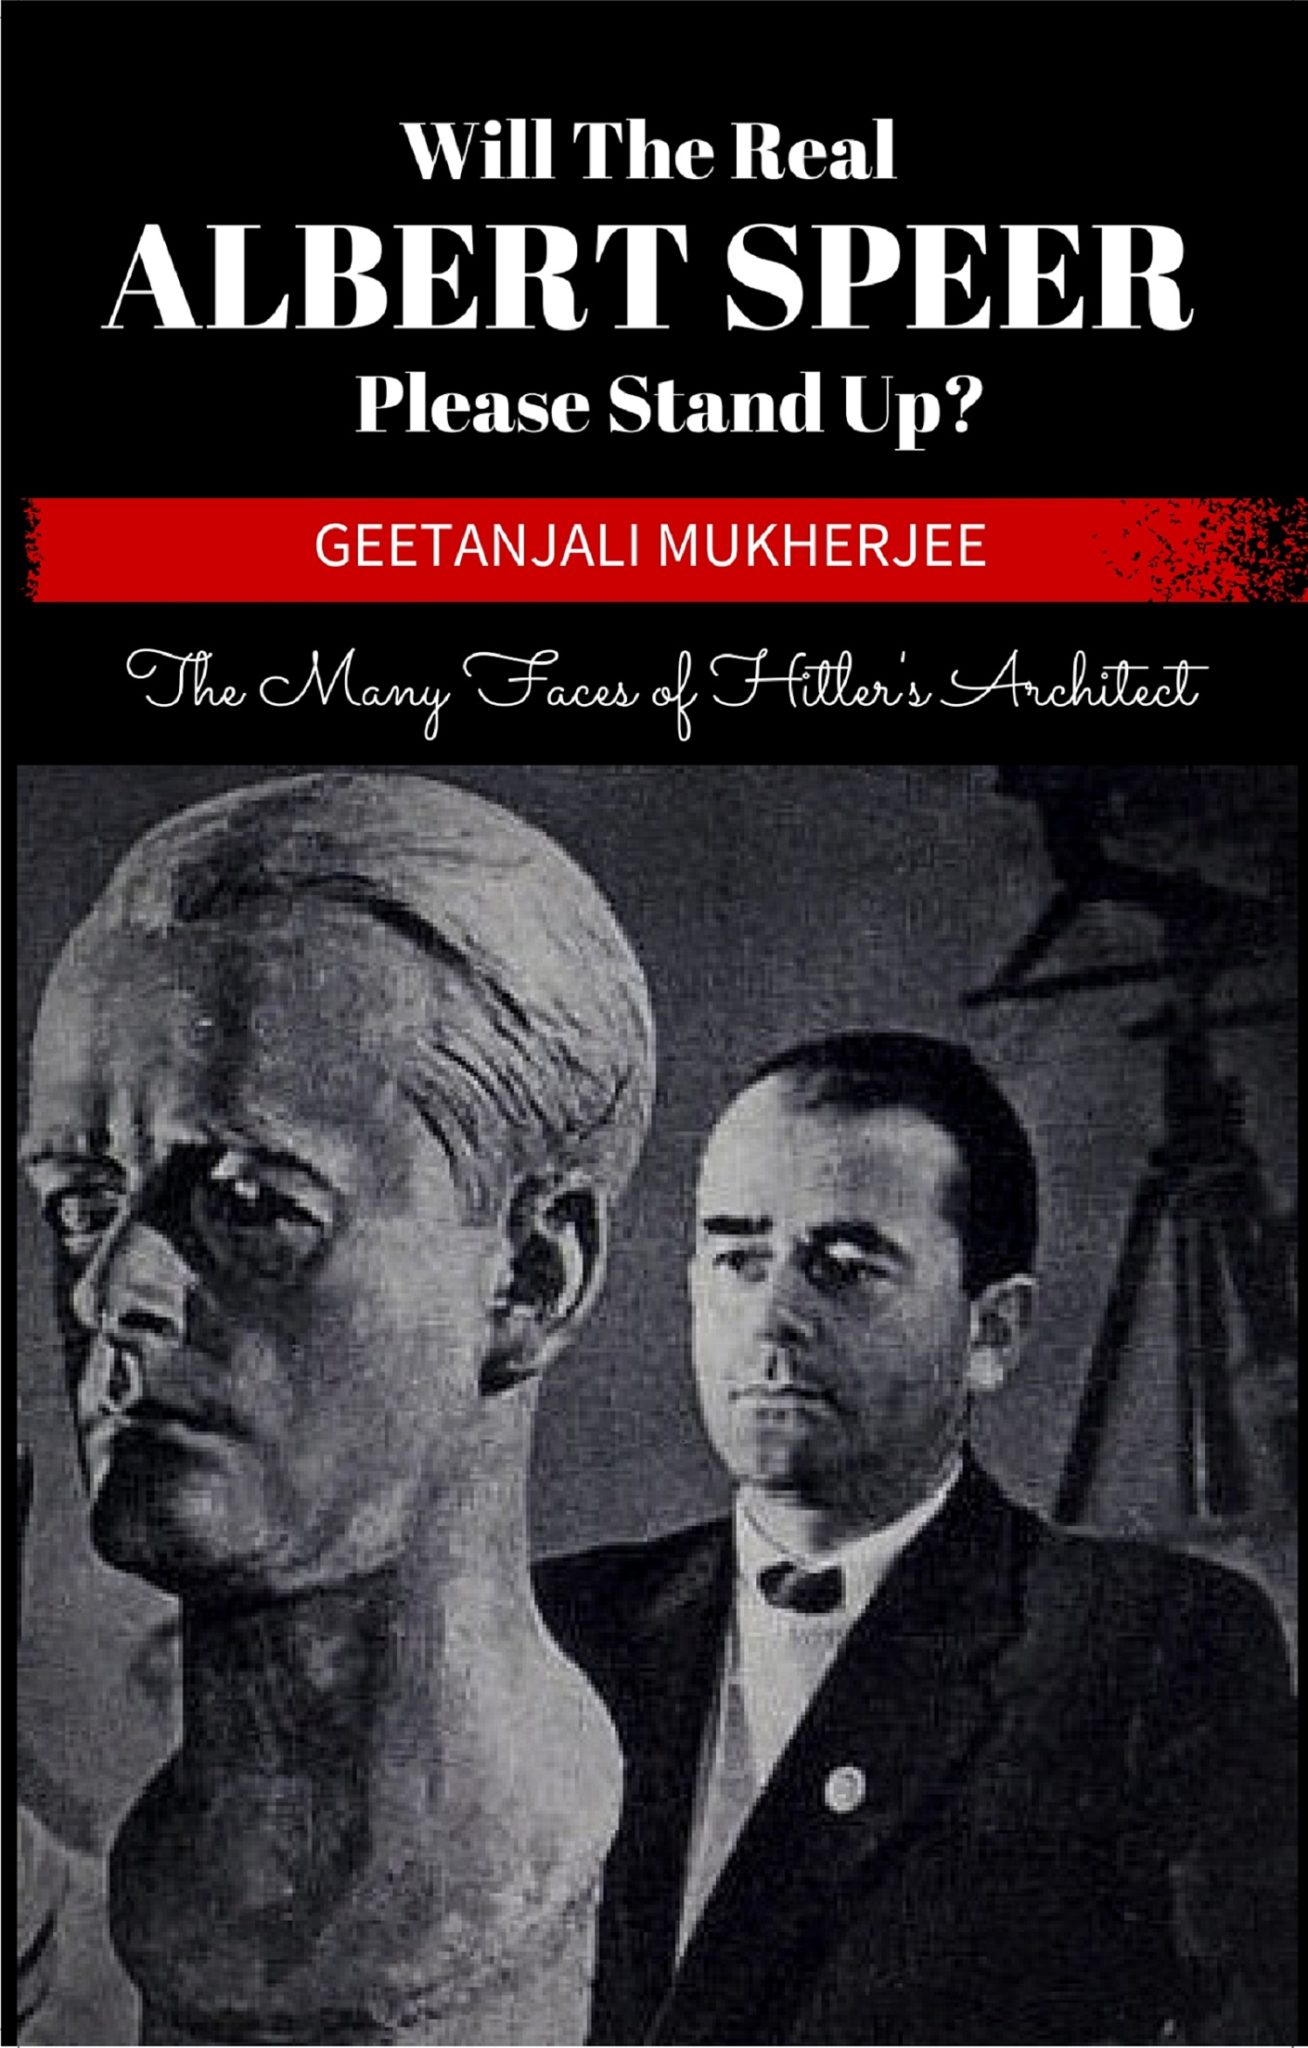 FREE: Will The Real Albert Speer Please Stand Up?: The Many Faces of Hitler’s Architect by Geetanjali Mukherjee